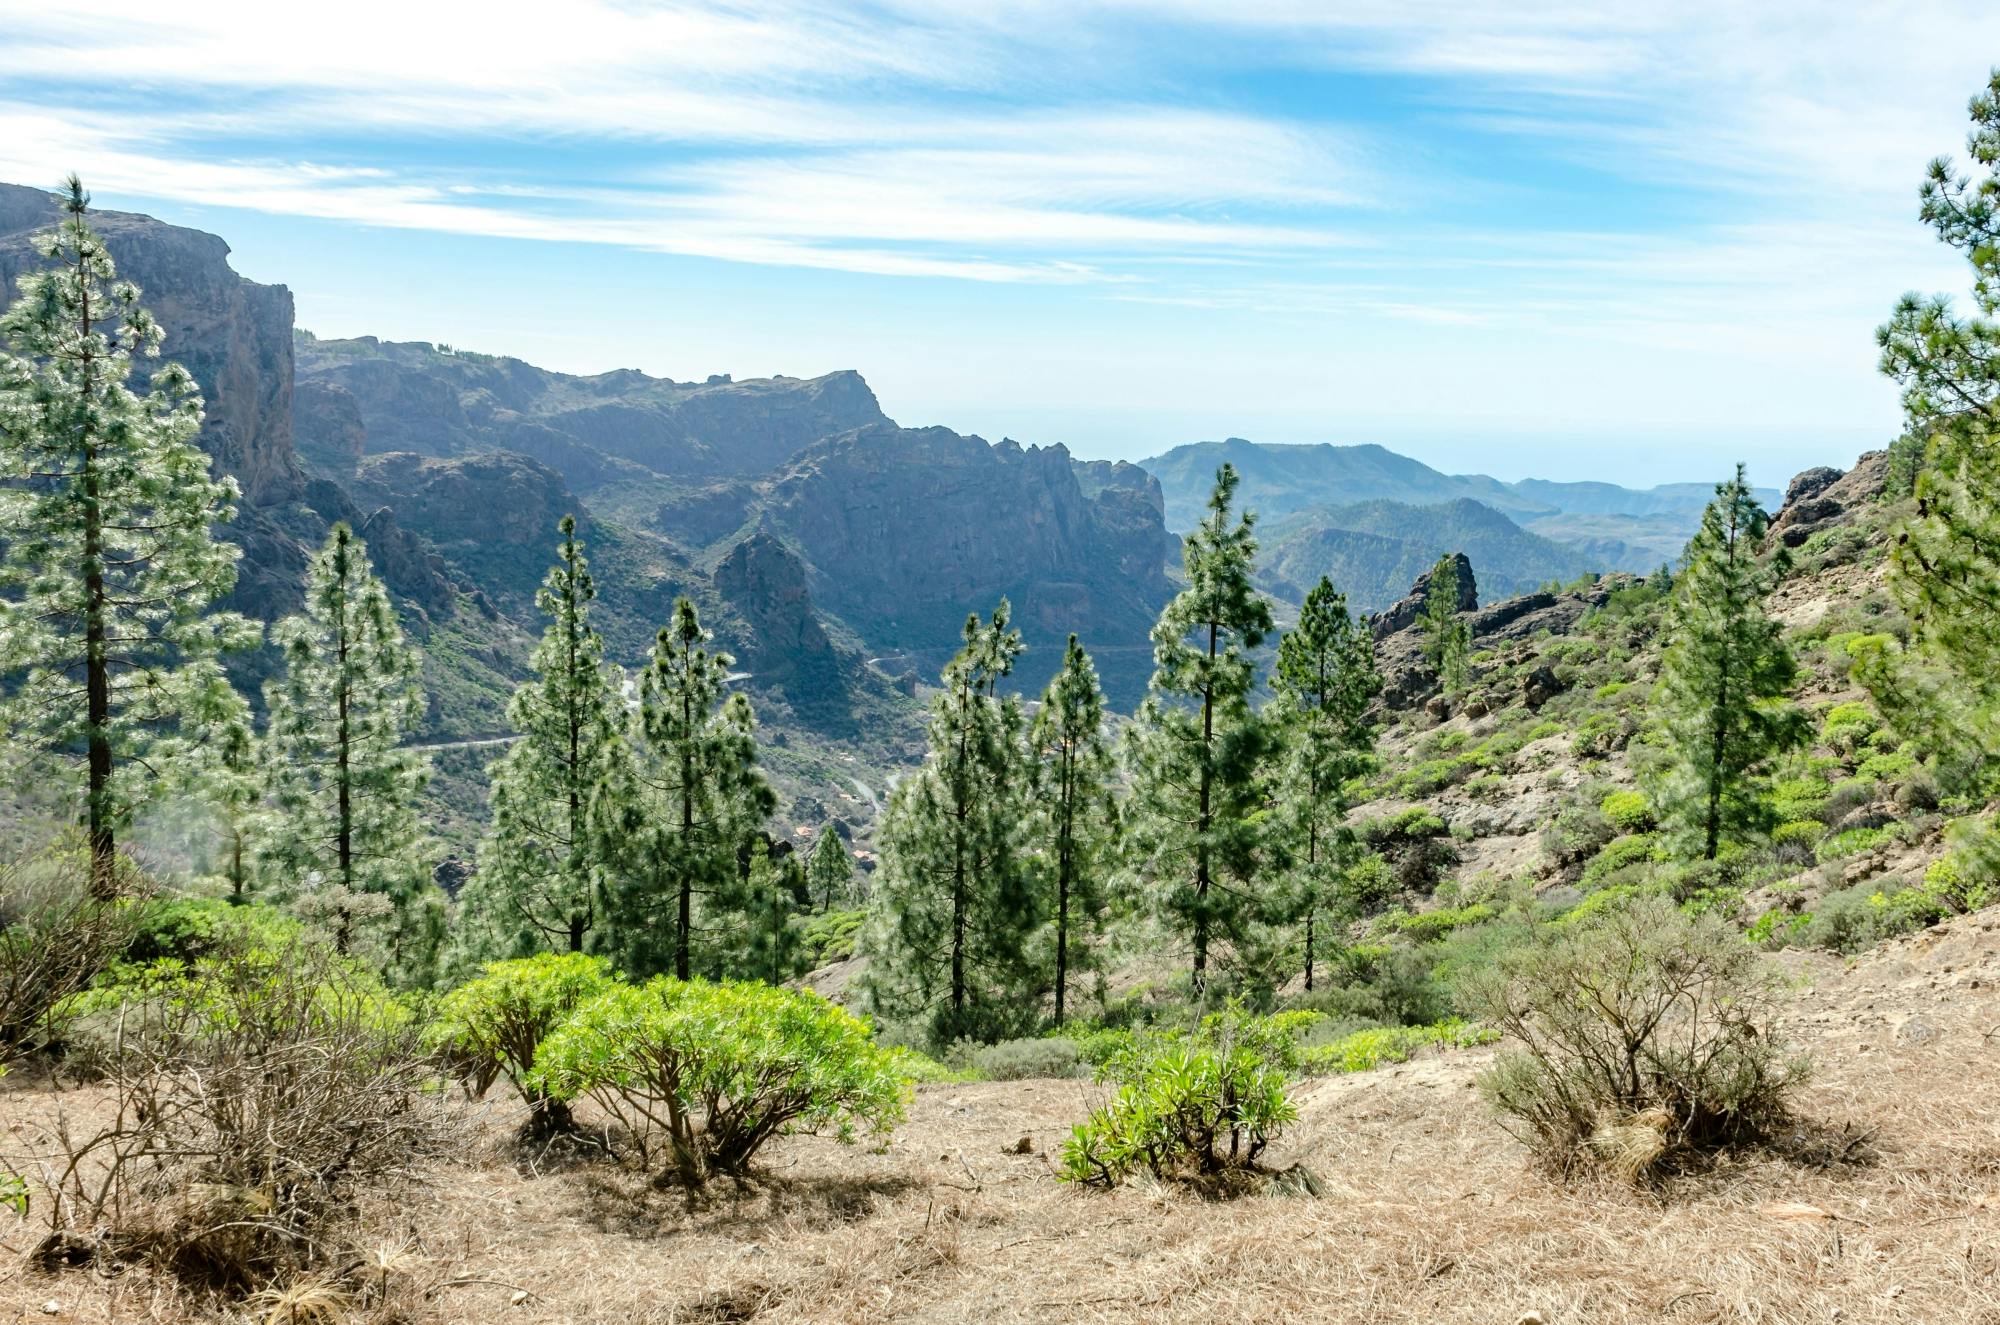 Private Tour of Gran Canaria Highlights with Aloe Vera Plantation